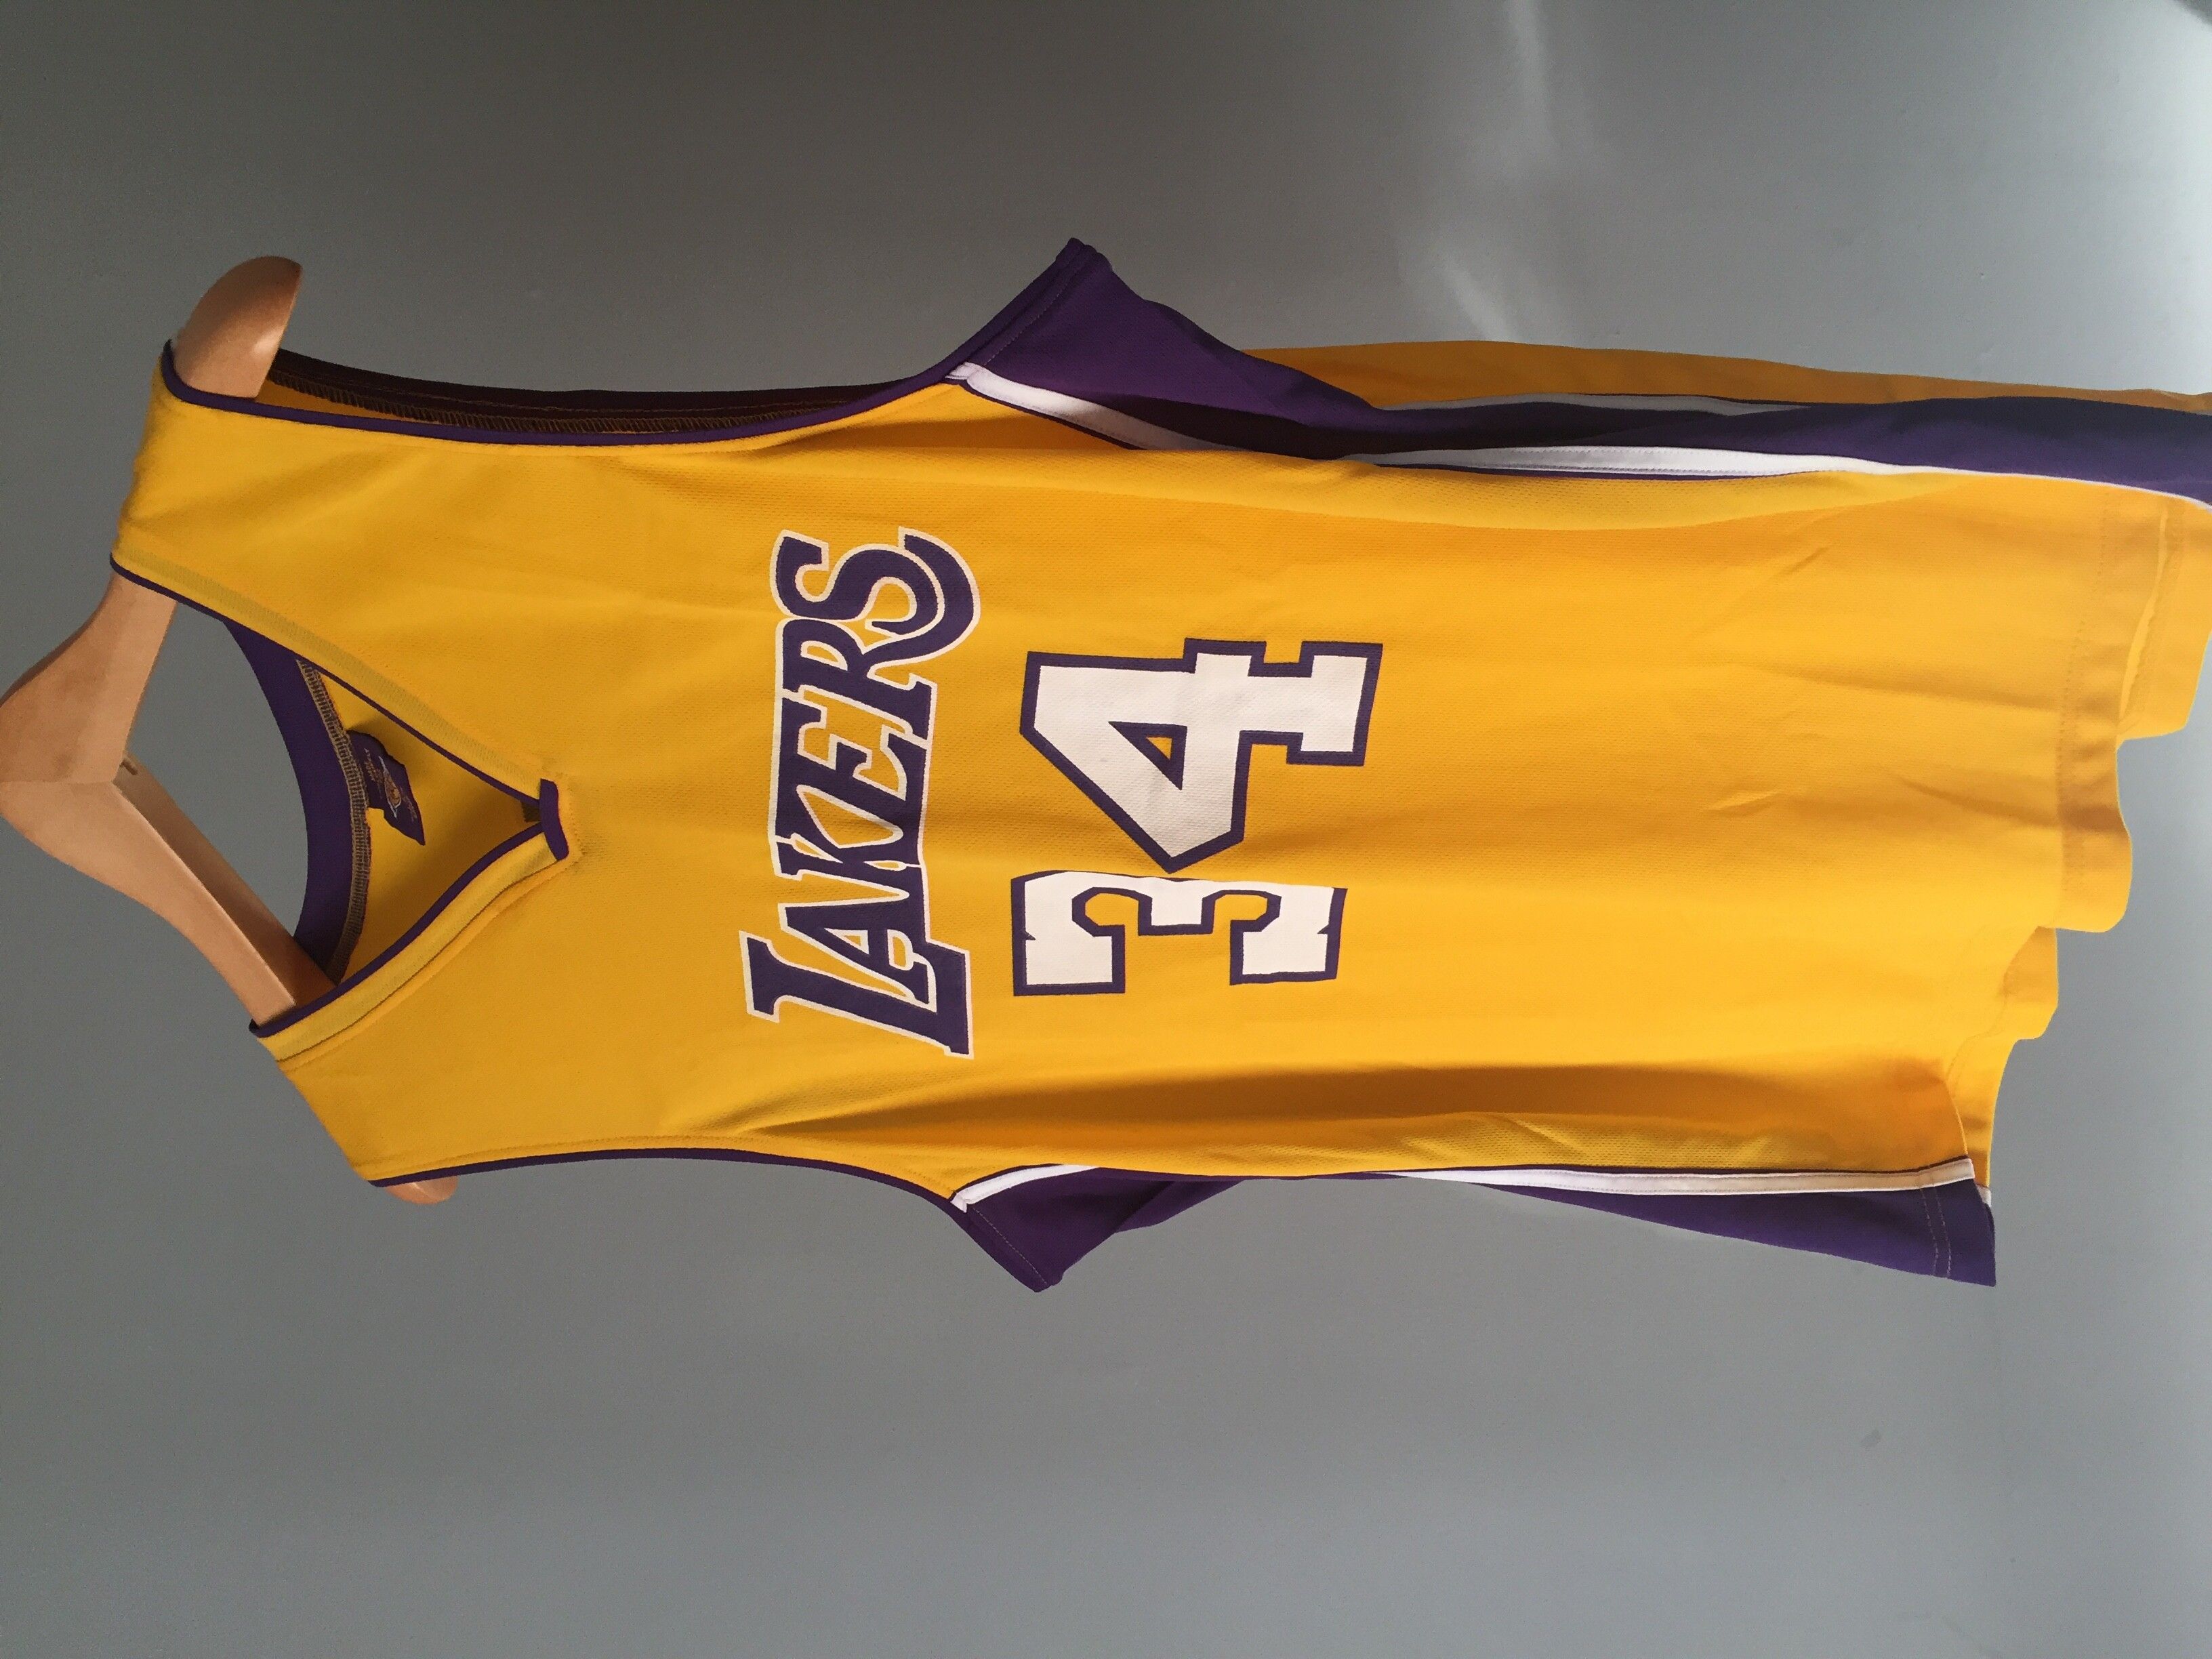 Los Angeles Jersey Los Angeles lakers O'Neal jersey 34 Size US XL / EU 56 / 4 - 1 Preview